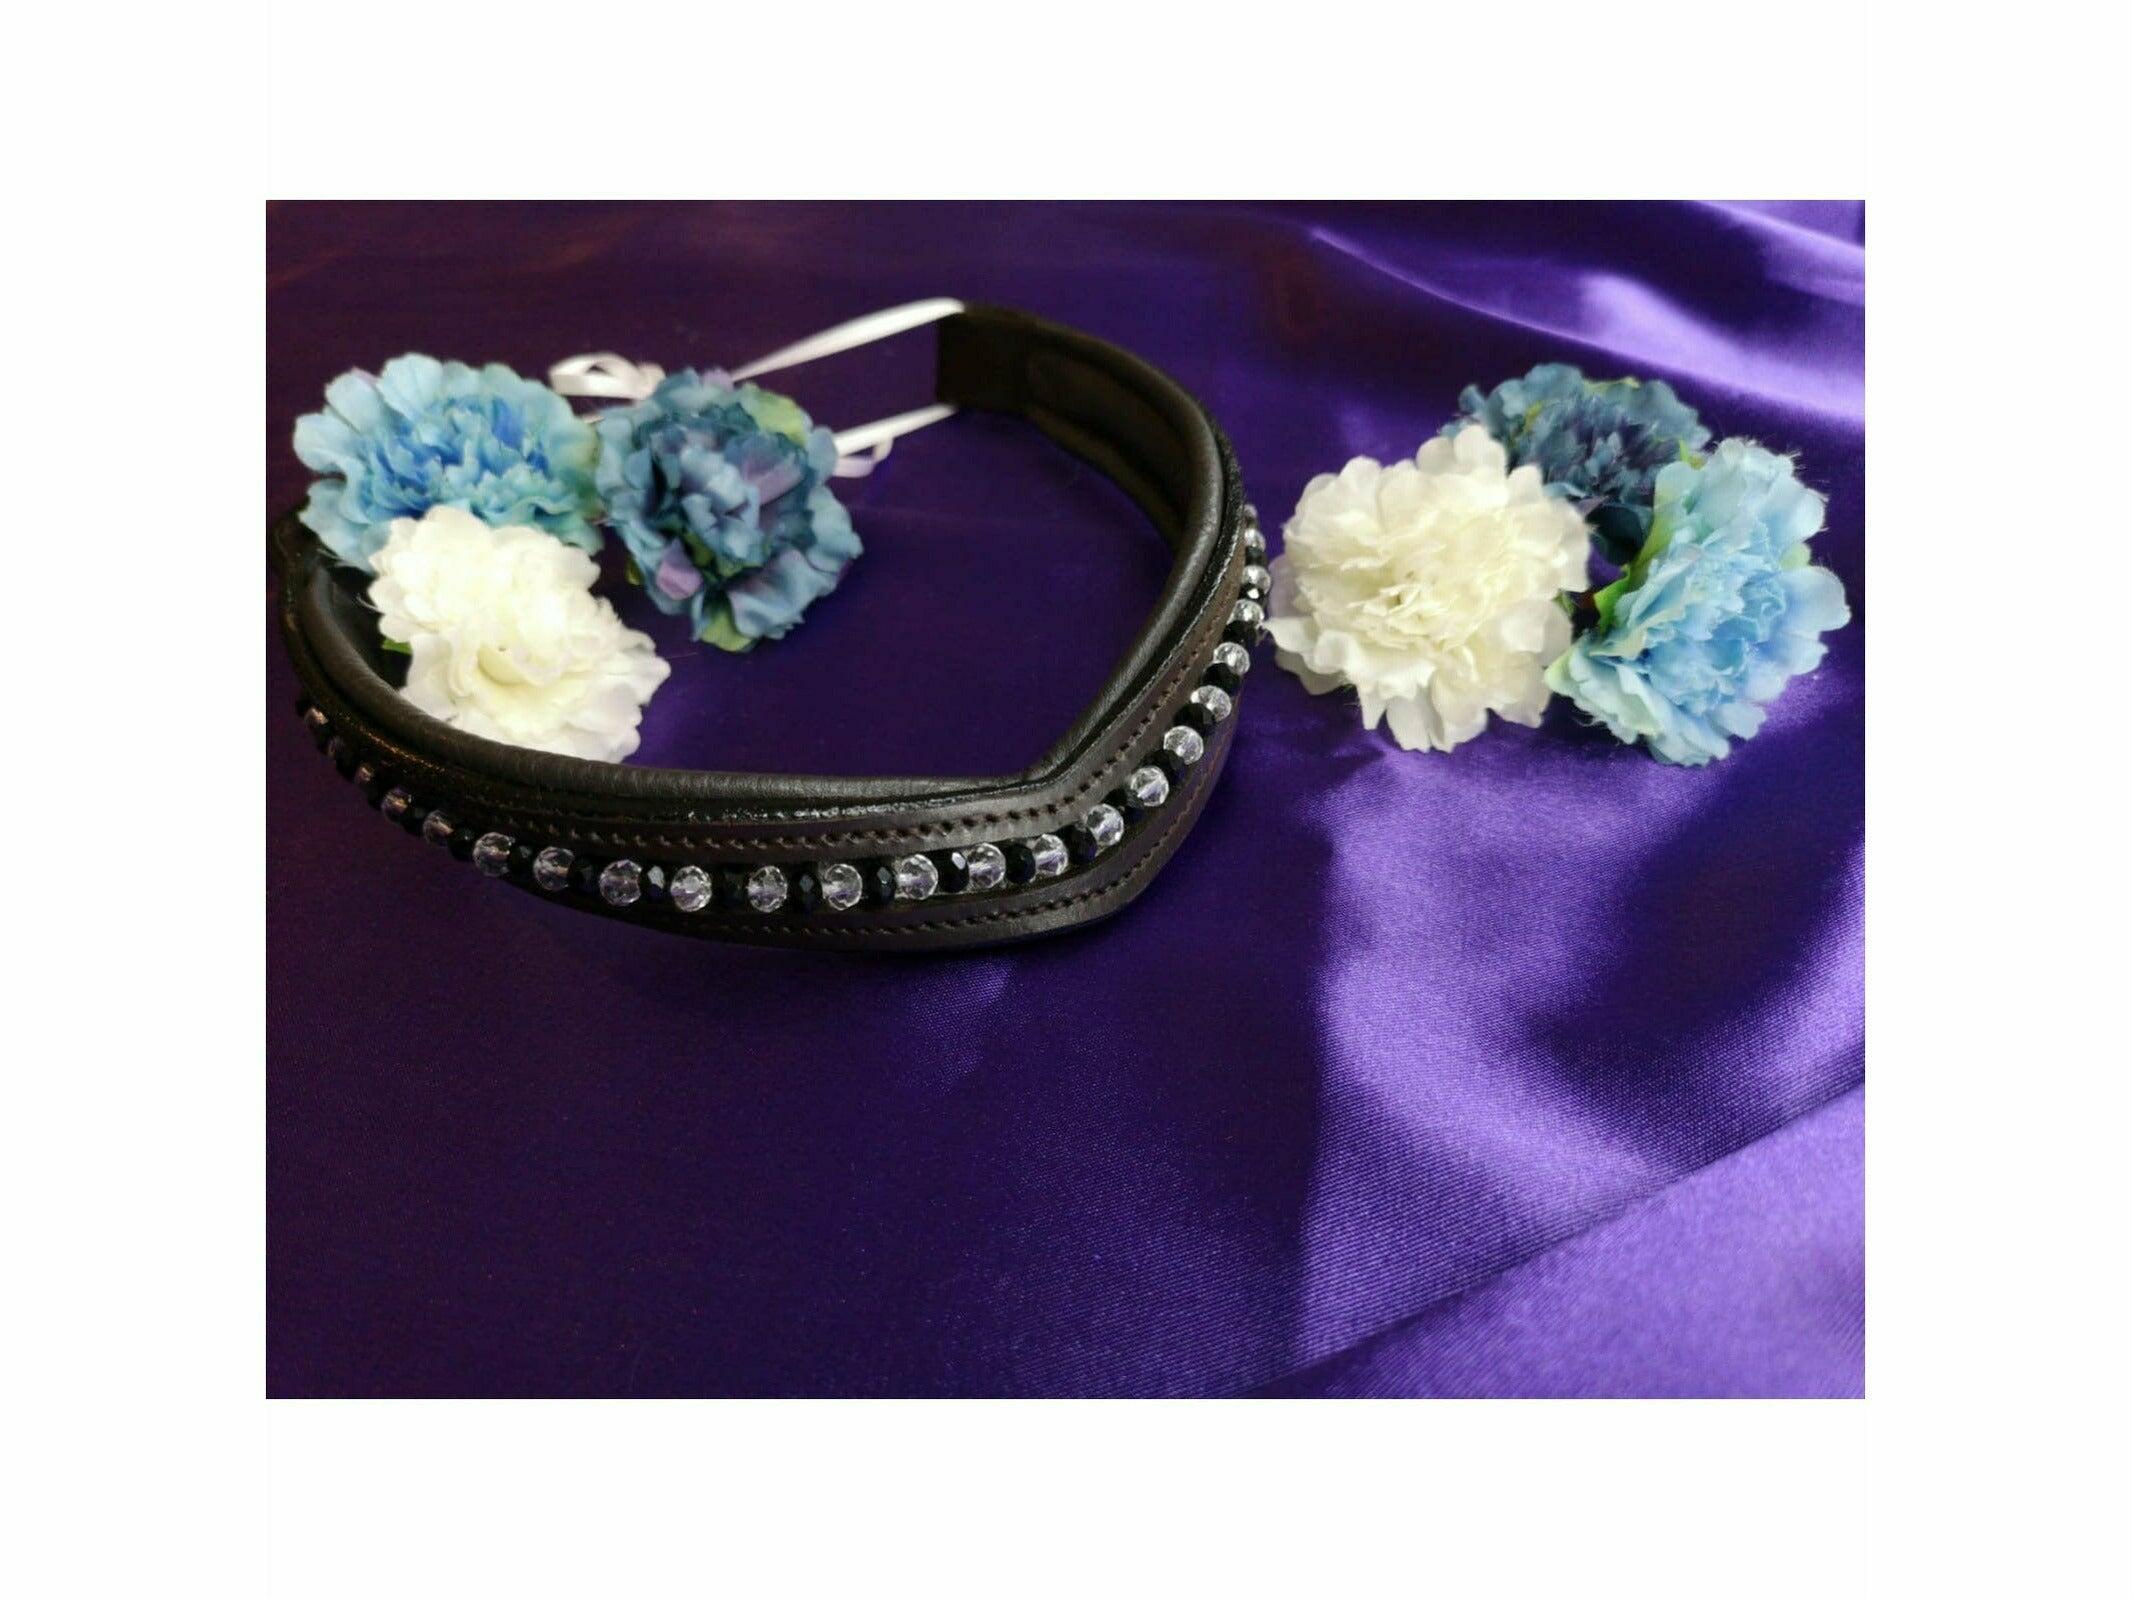 High quality genuine leather browband with hand stitched faceted glass beads sitting on a purple background with artificial flowers